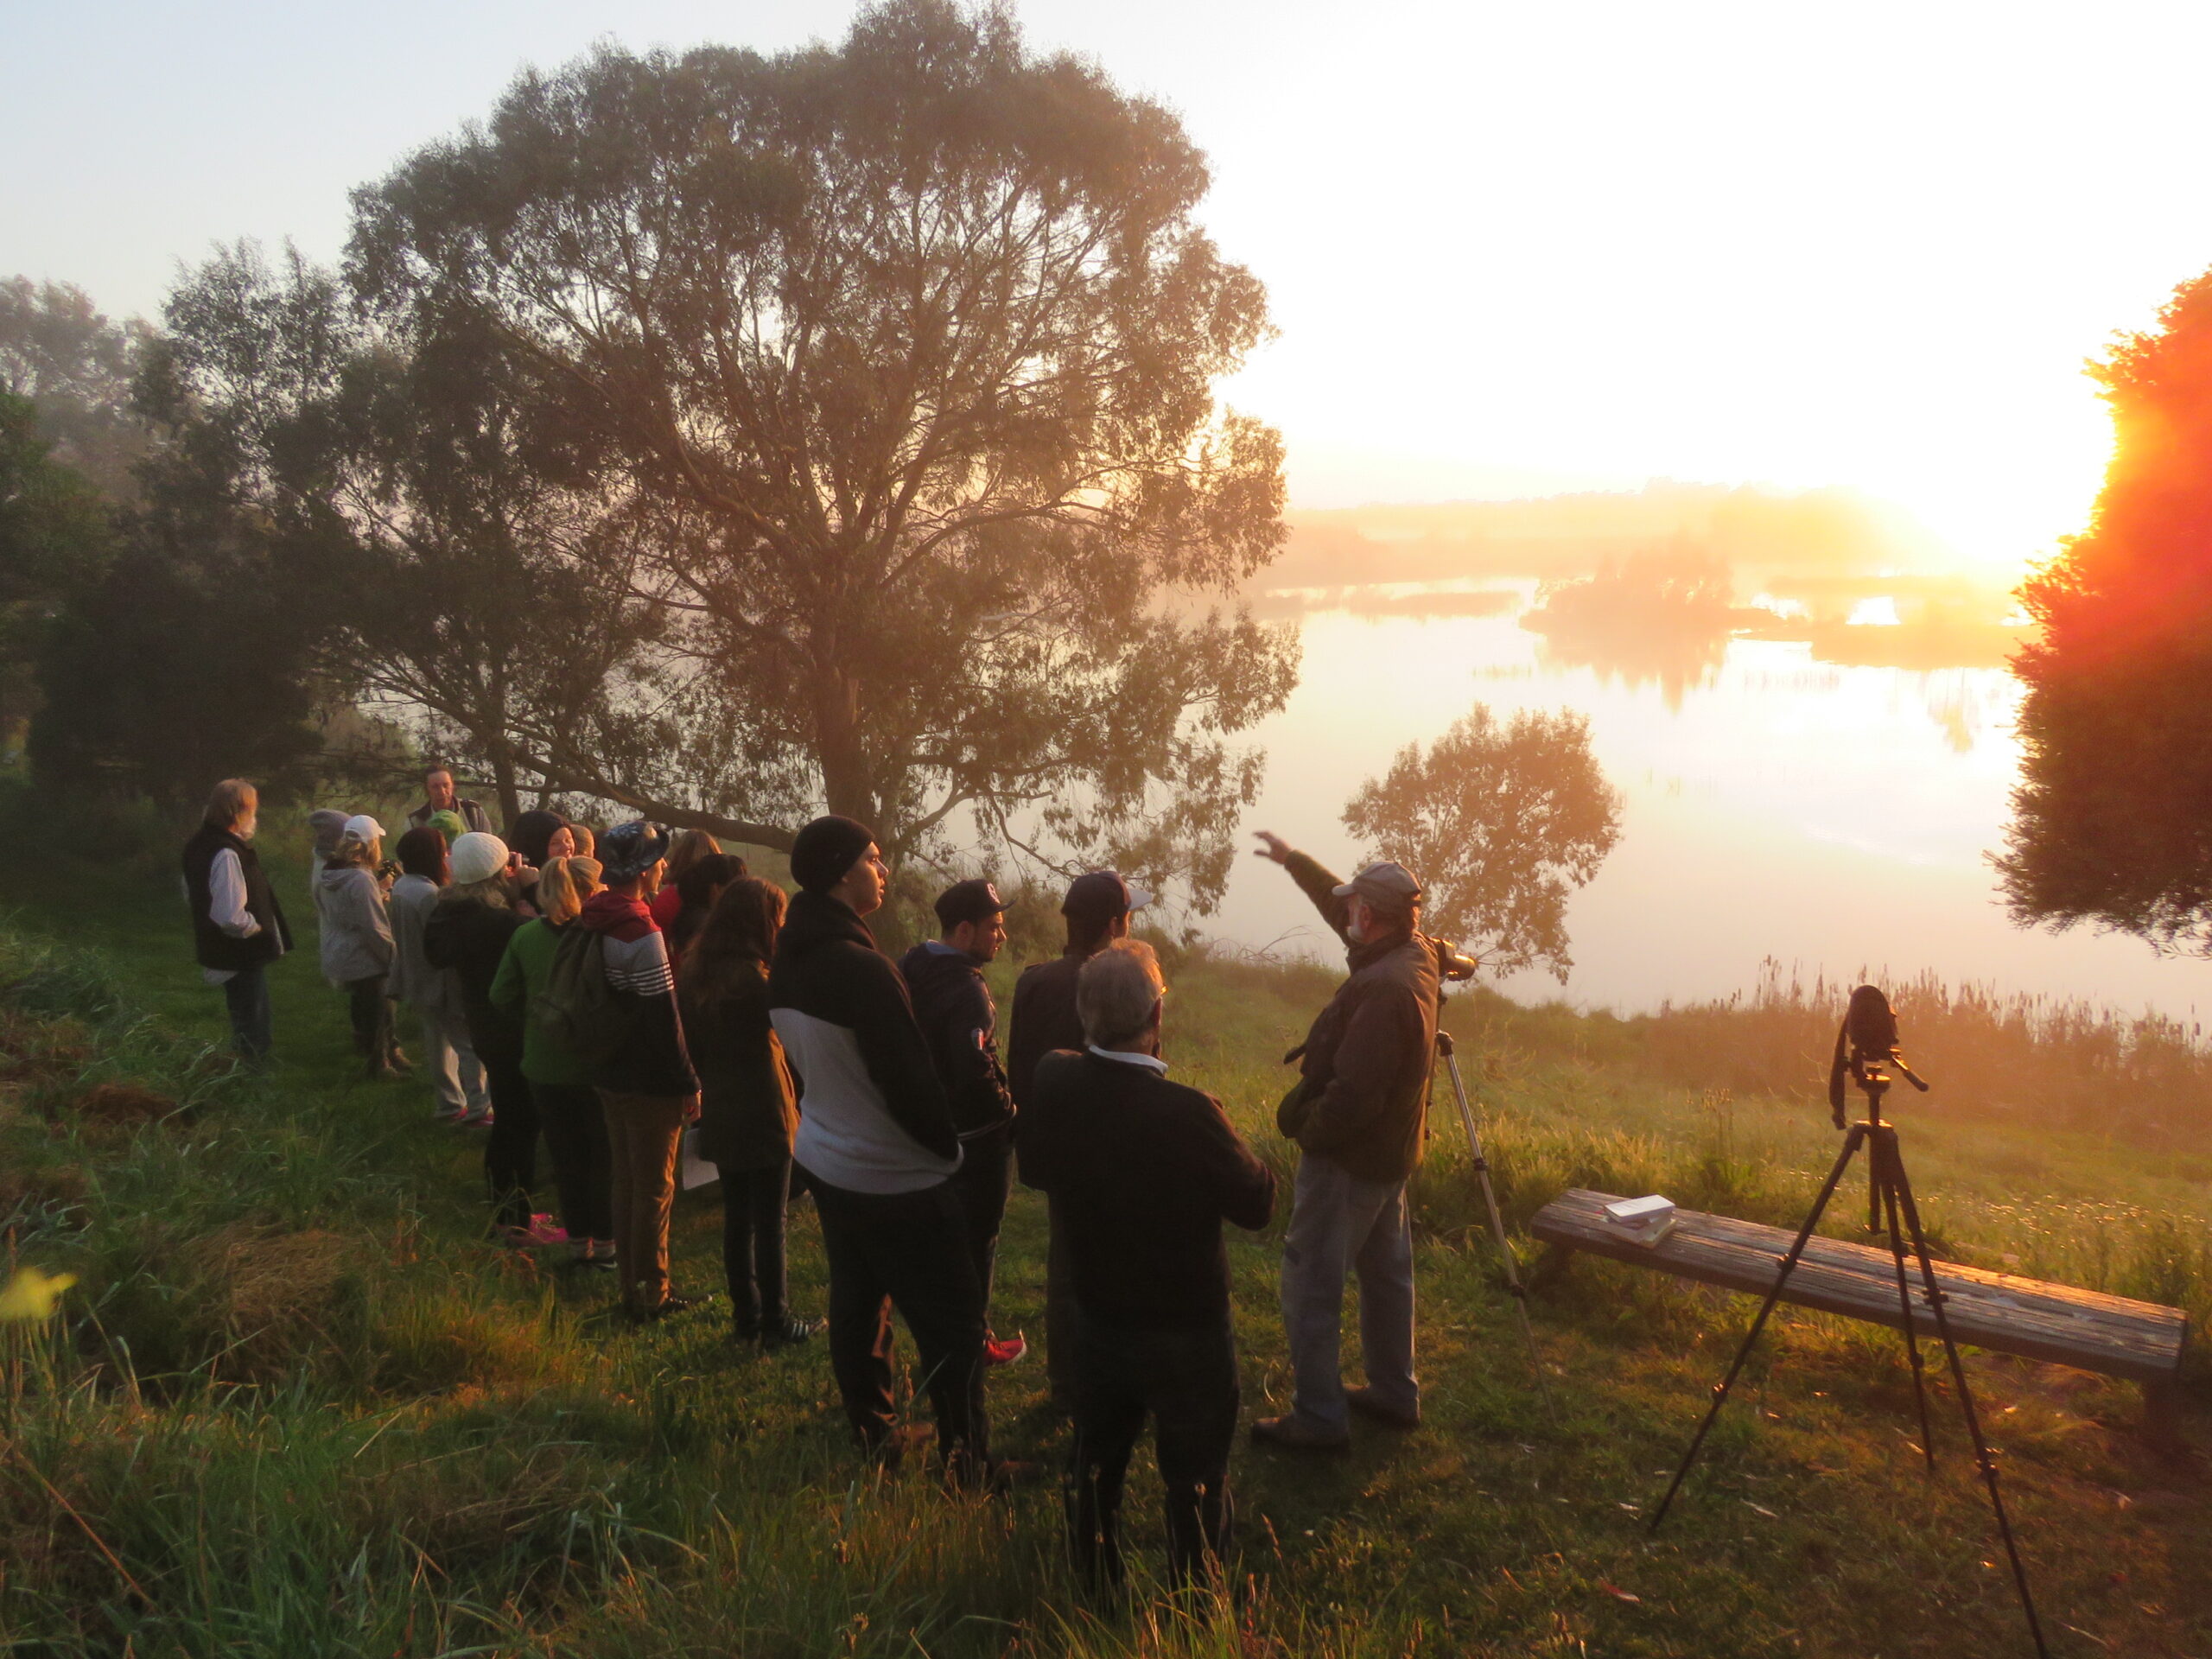 Sunrise bird watching at Cecil Hoskins Nature Reserve during a conference in 2015